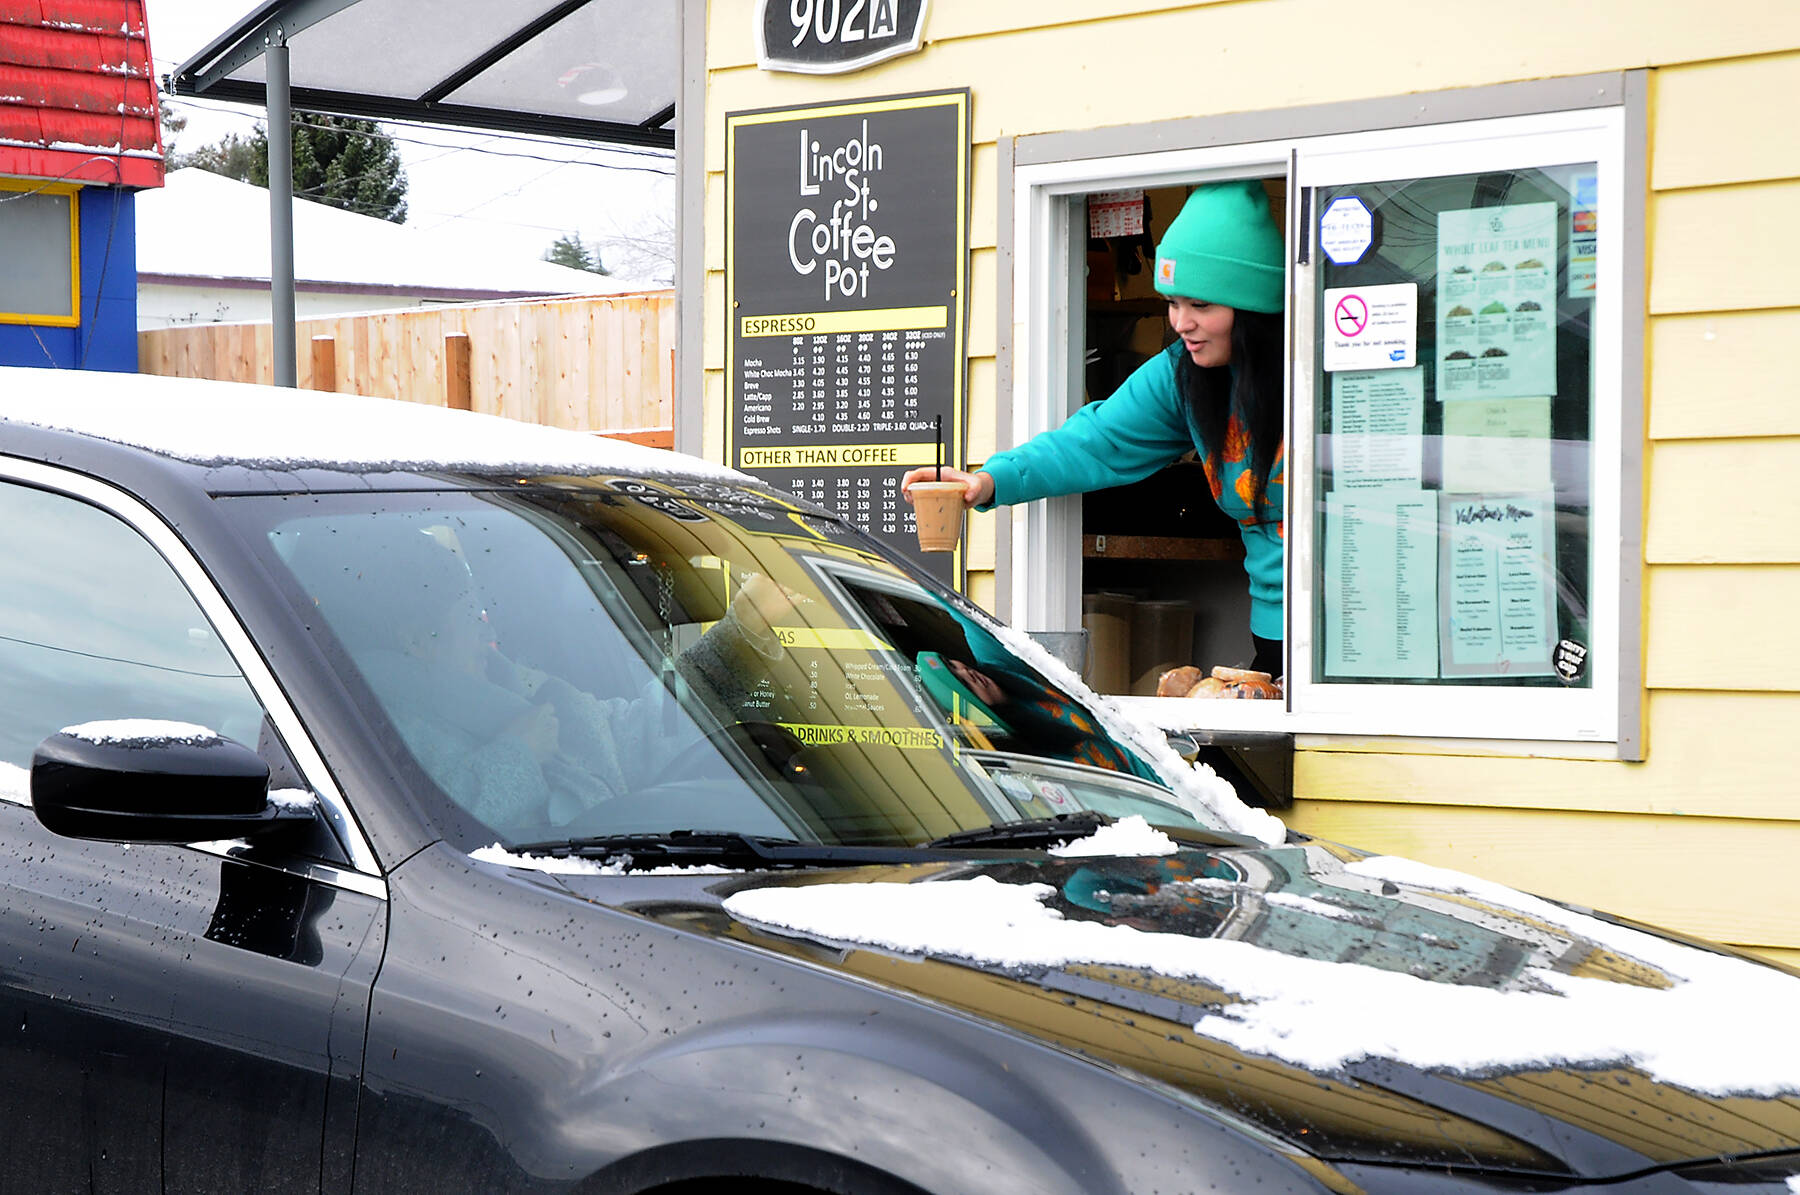 Andie Spencer, a barista at the Lincoln Street Coffee Pot in Port Angeles, hands a drink order to a customer in a snow-covered car on Wednesday after the city received a dusting of snow overnight at sea level. Higher elevations reported up to 2 inches of snow. Areas across the North Olympic Peninsula, including in Forks and Port Townsend, received little snow overnight. Scattered periods of snow with cold temperatures are expected into early next week across the Peninsula. (Keith Thorpe/Peninsula Daily News)